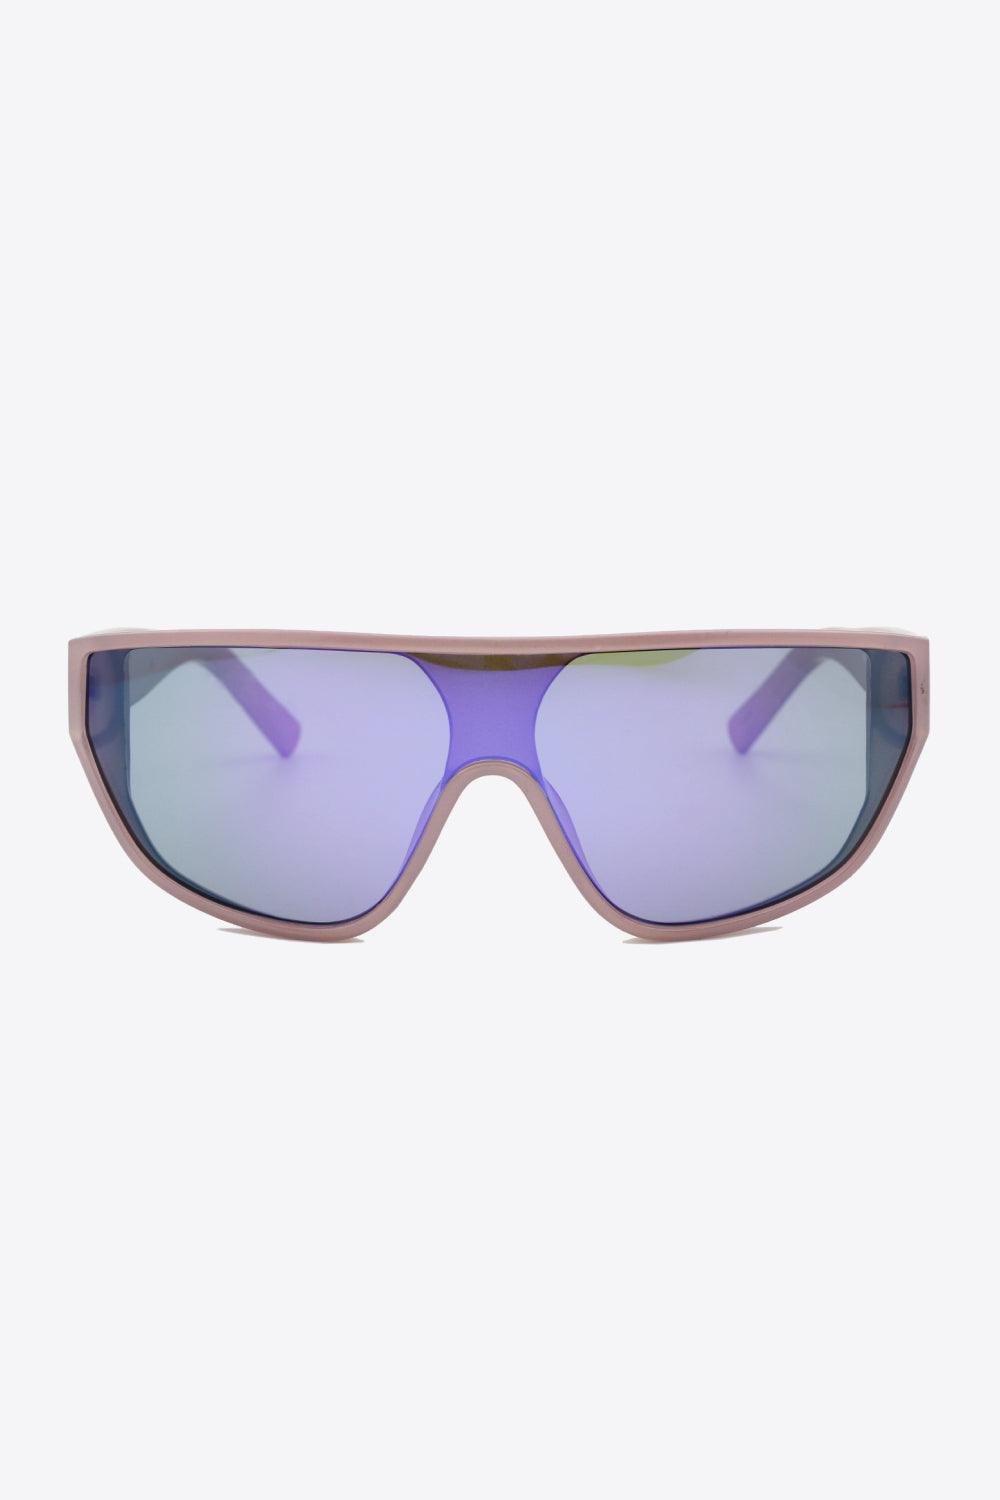 Wayfarer Sunglasses in Lilac and Black - Olive Ave